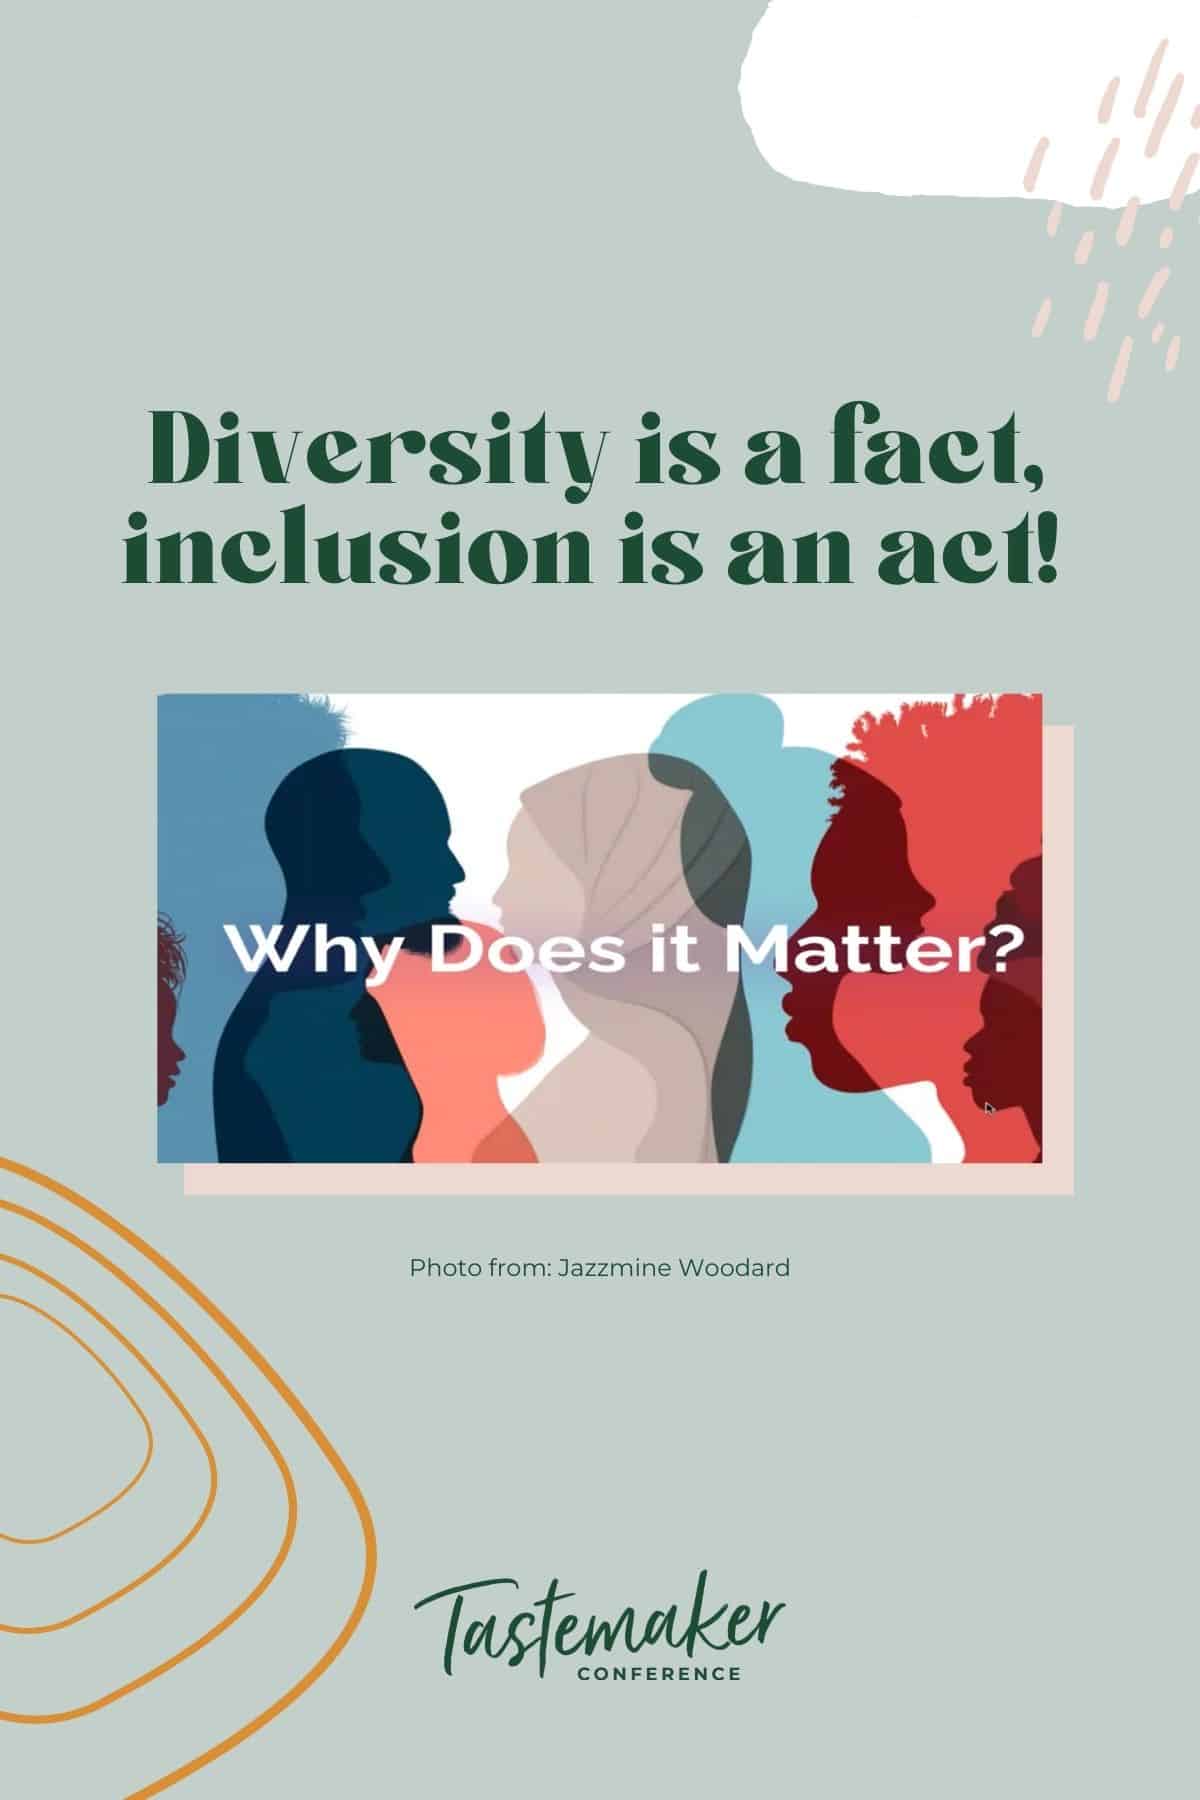 Graphic reading diversity is a fact inclusion is an act and a outline of faces saying why does it matter